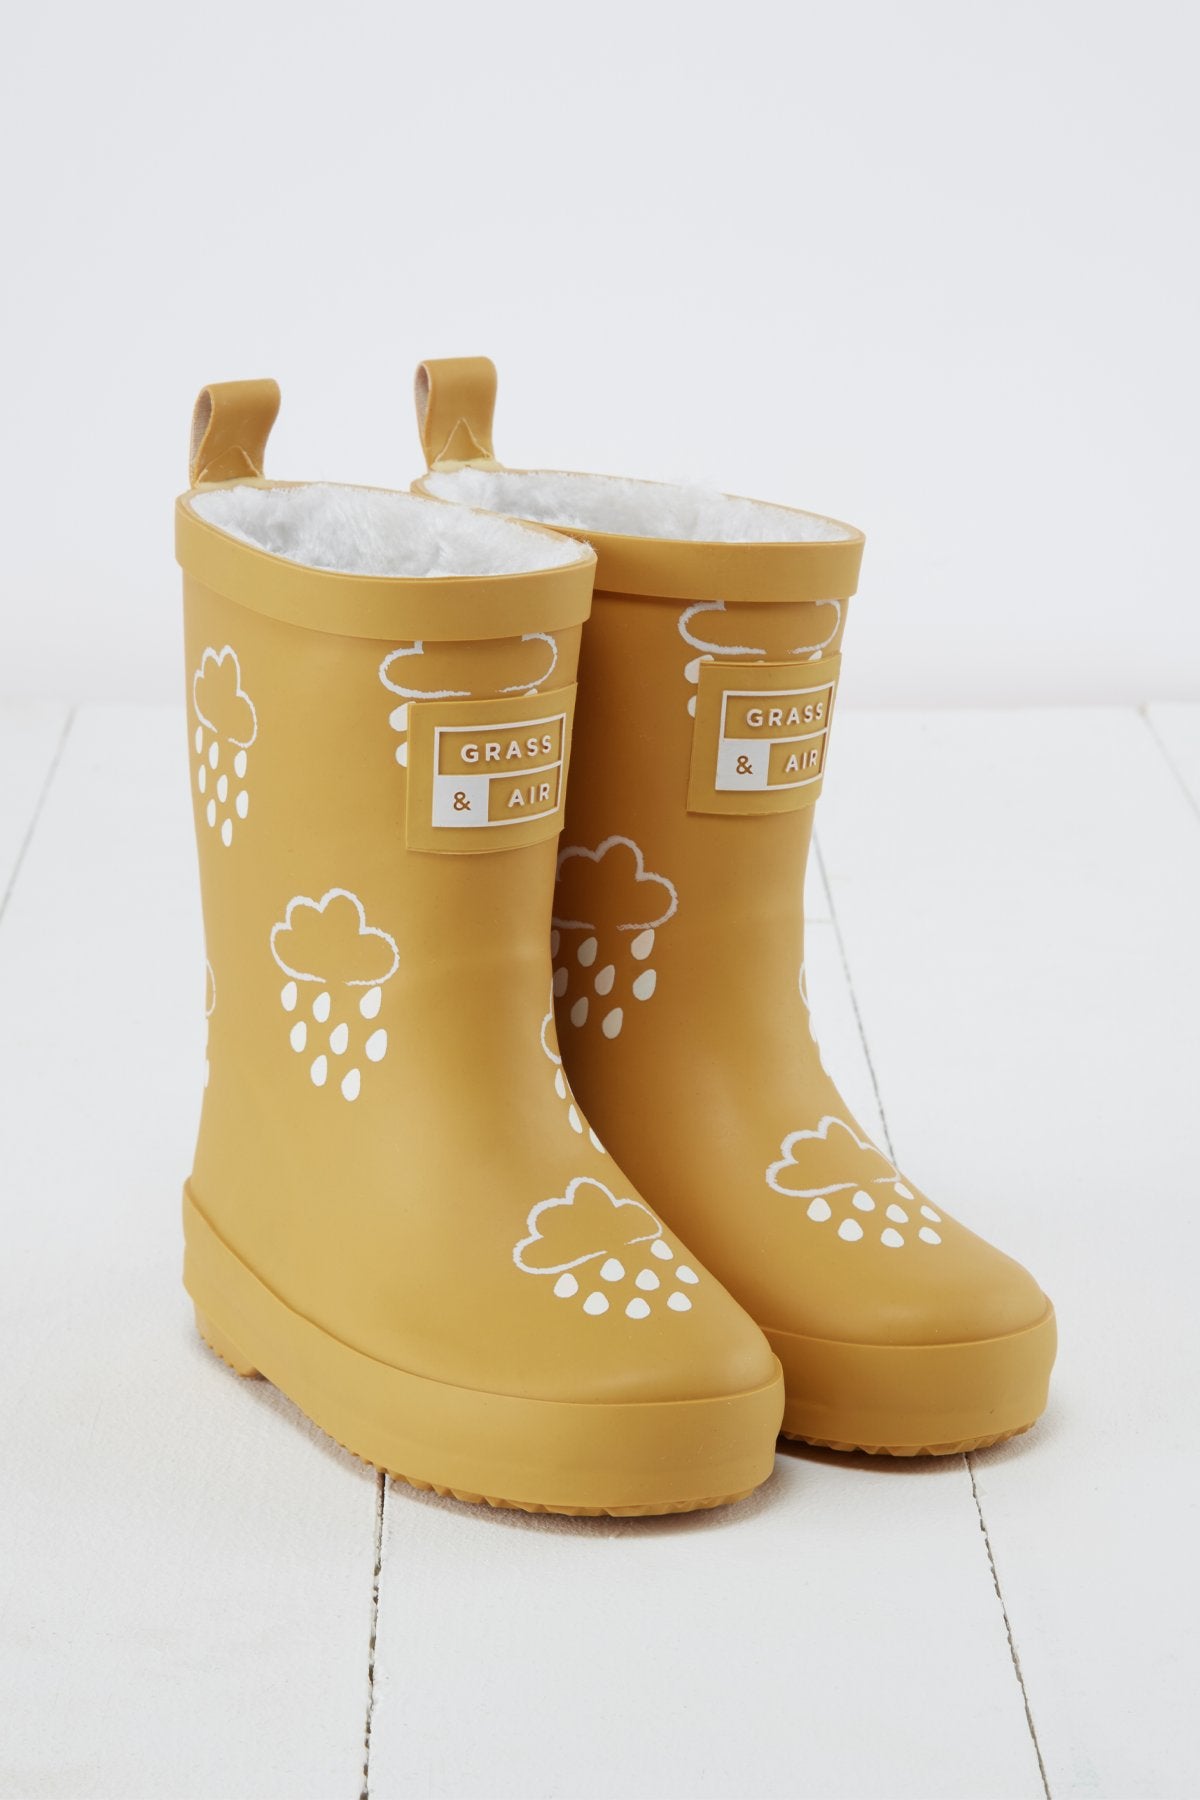 Ochre Colour-Changing Kids Wellies with Teddy Fleece Lining